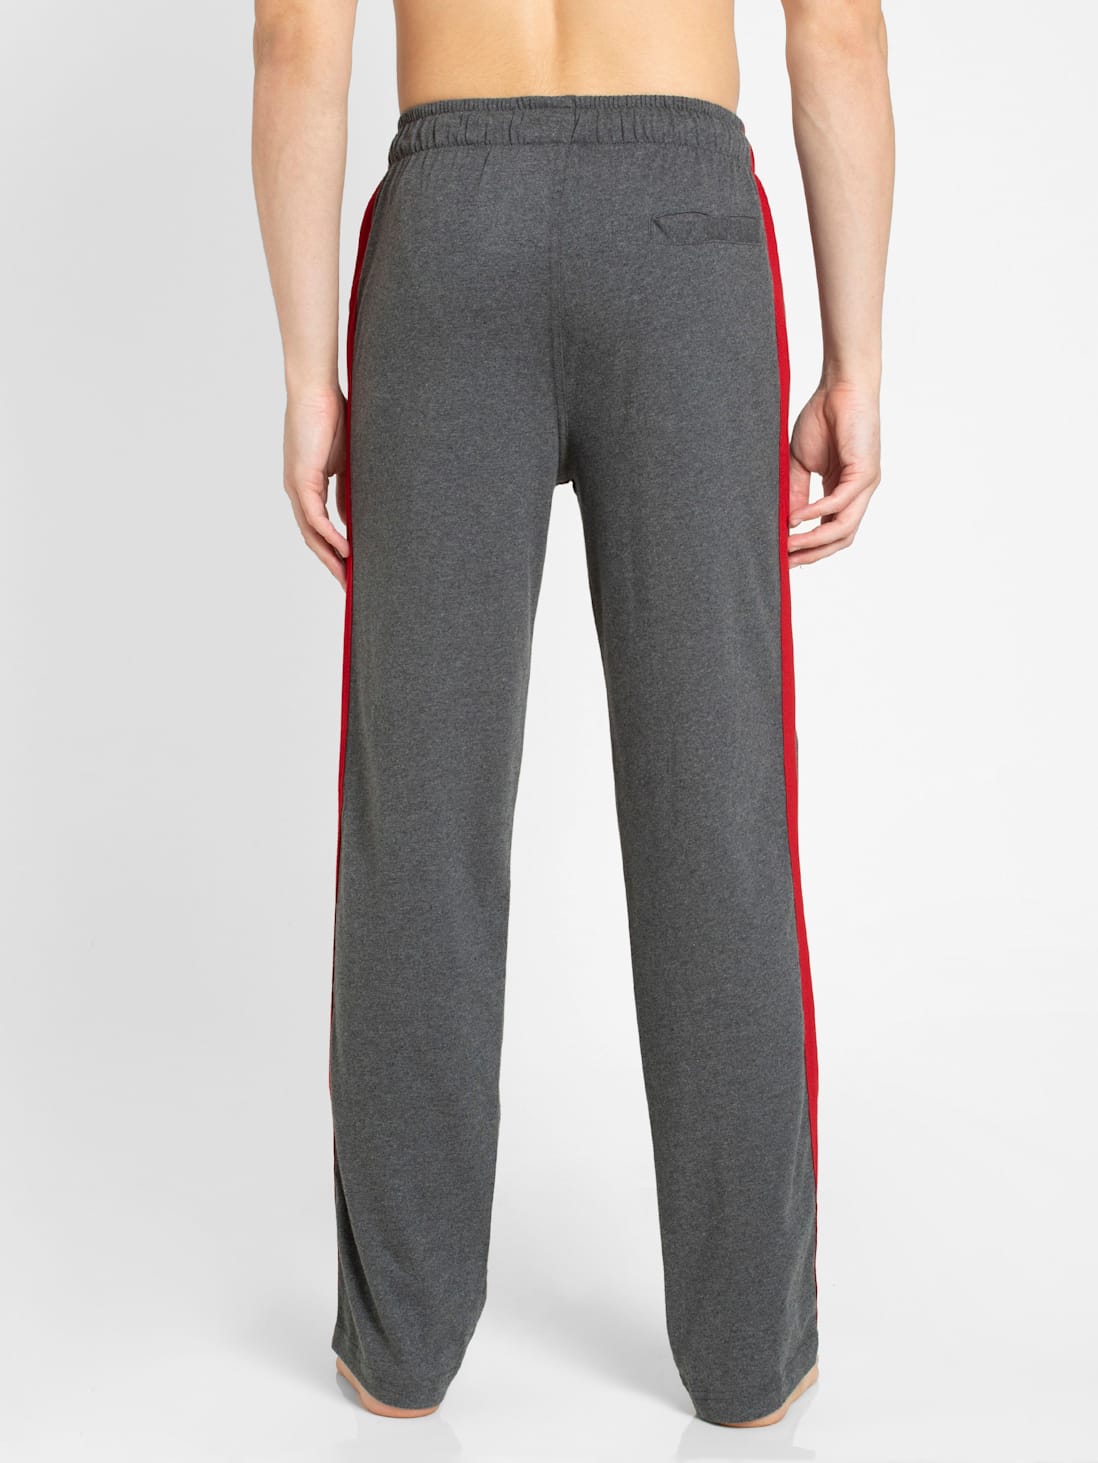 Athleisure All Day Pants for Women Buy Athleisure Pants for Women Online  at Best Price  Jockey India